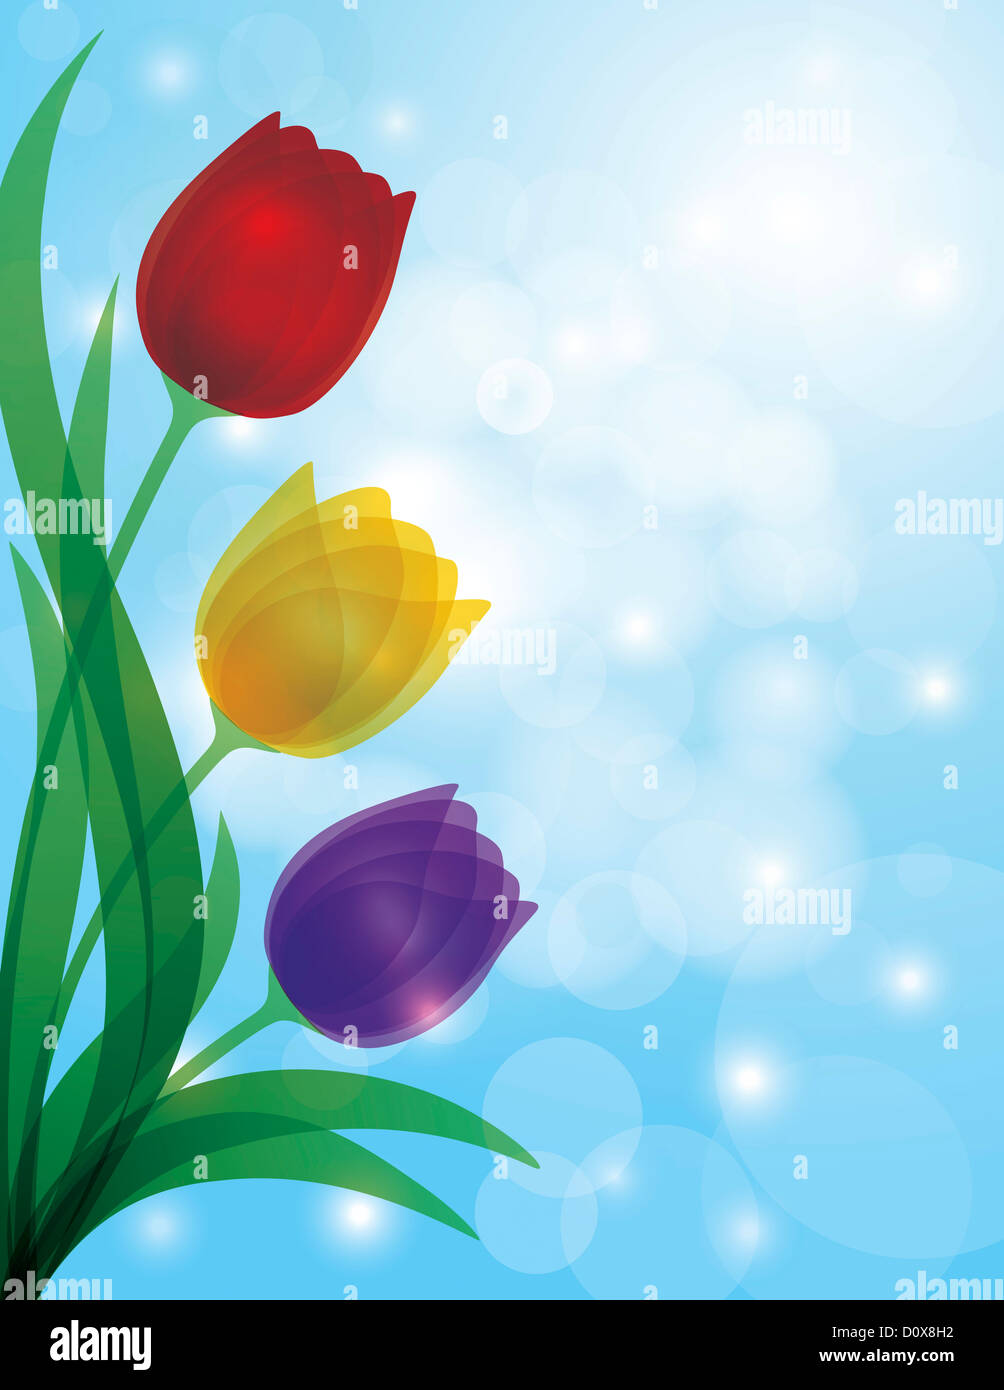 Colorful Tulips Bouquet Flowers for Mothers Day or Easter Illustration on Blue Sky Bokeh Background Stock Photo